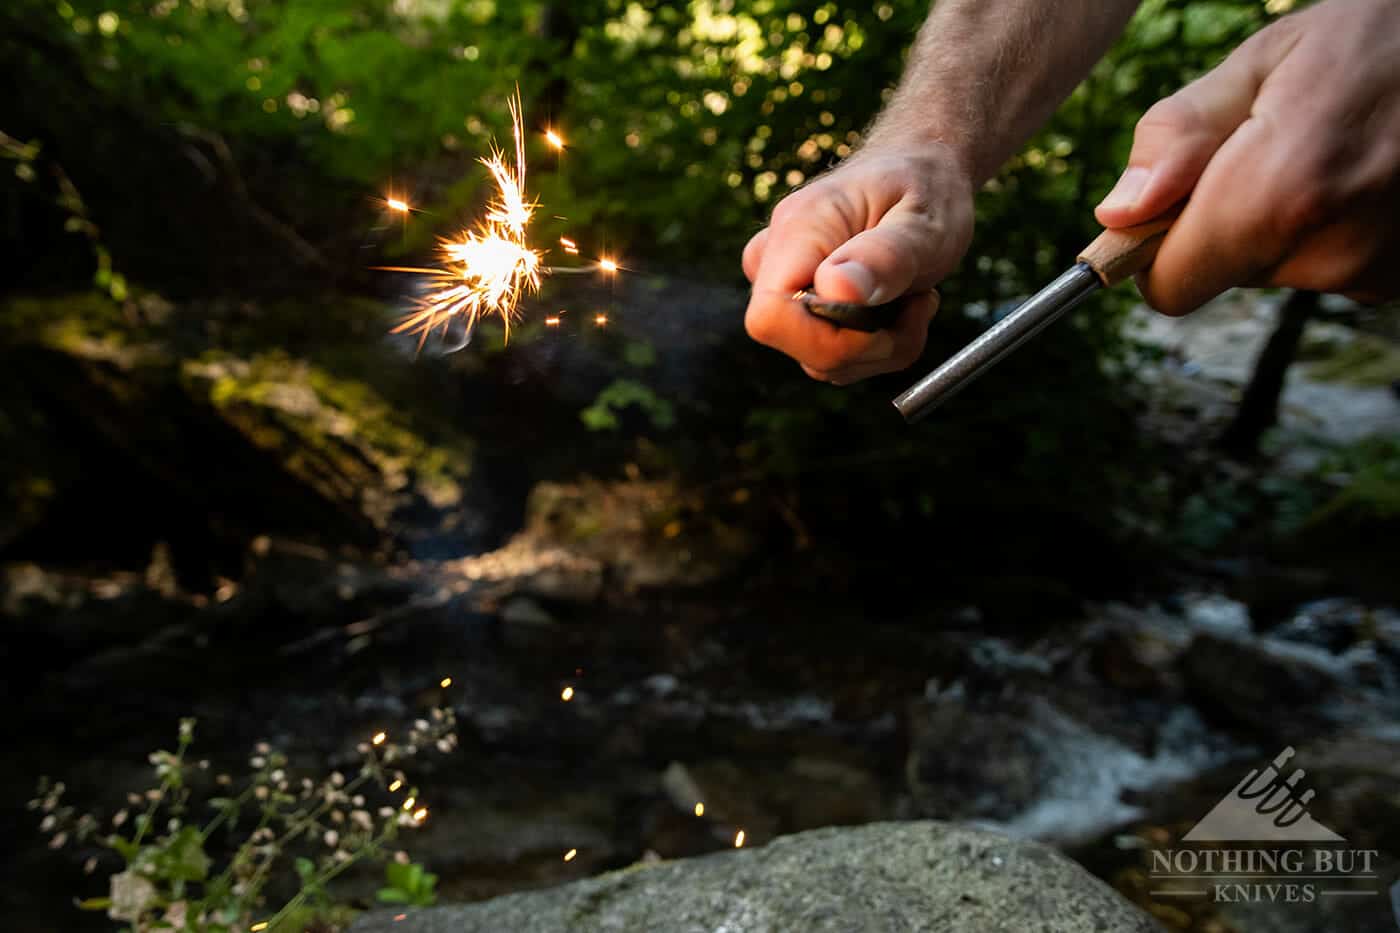 This Bill Moran designed knife throws a lot of spark, and it is a great option for fire starting while camping or backpacking. 